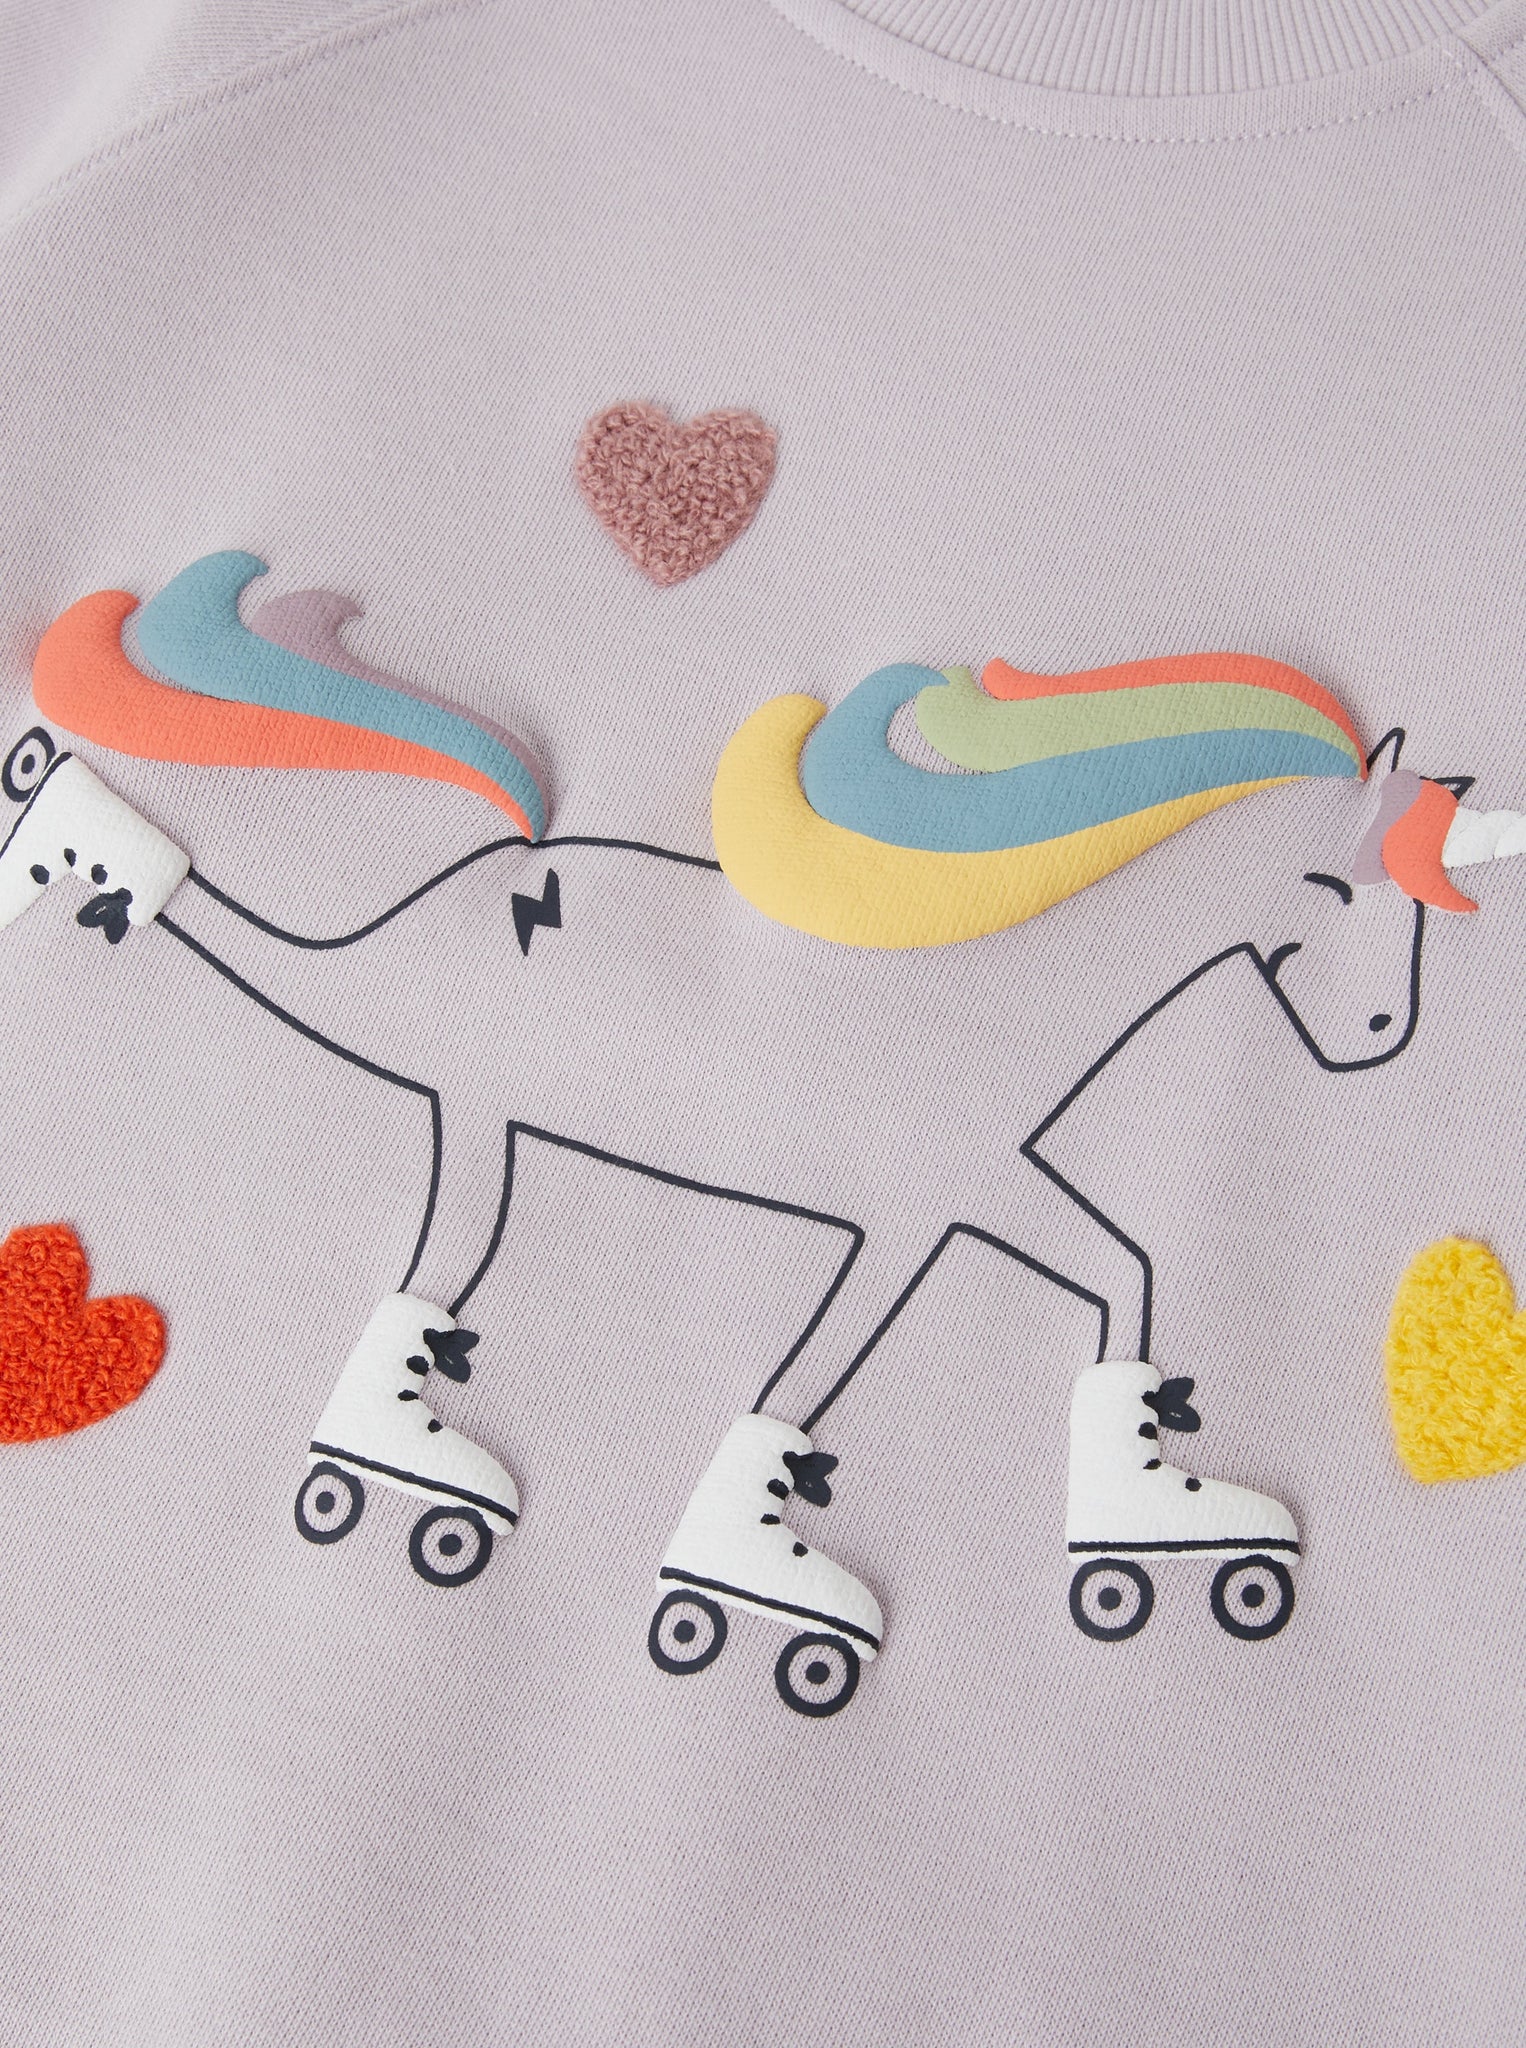 Unicorn Print Kids Sweatshirt from the Polarn O. Pyret kidswear collection. Ethically produced kids clothing.